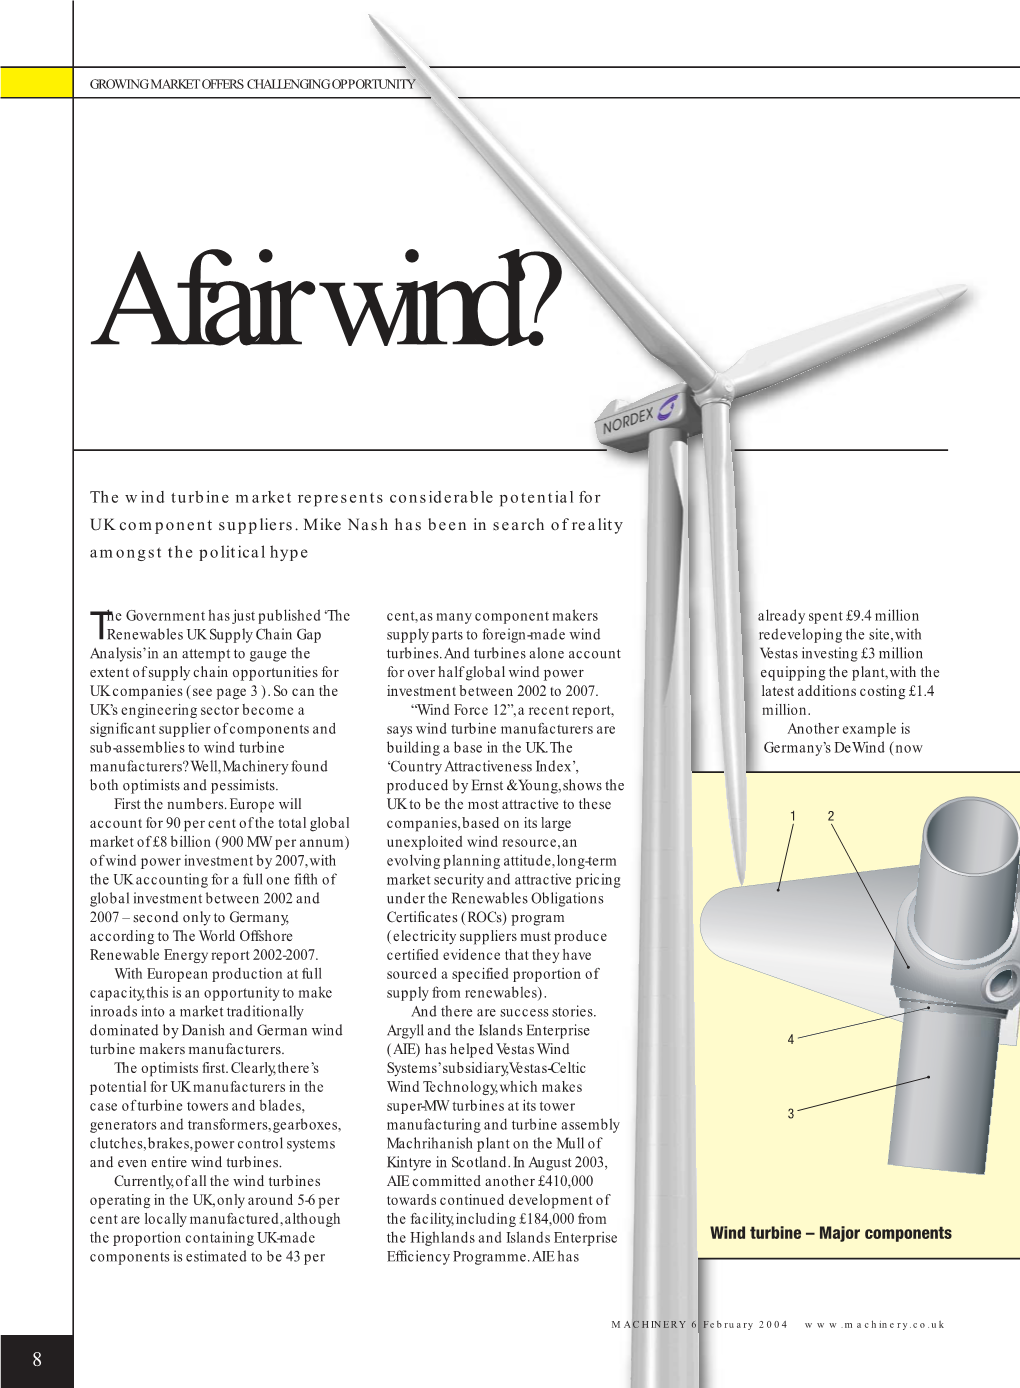 The Wind Turbine Market Represents Considerable Potential for UK Component Suppliers